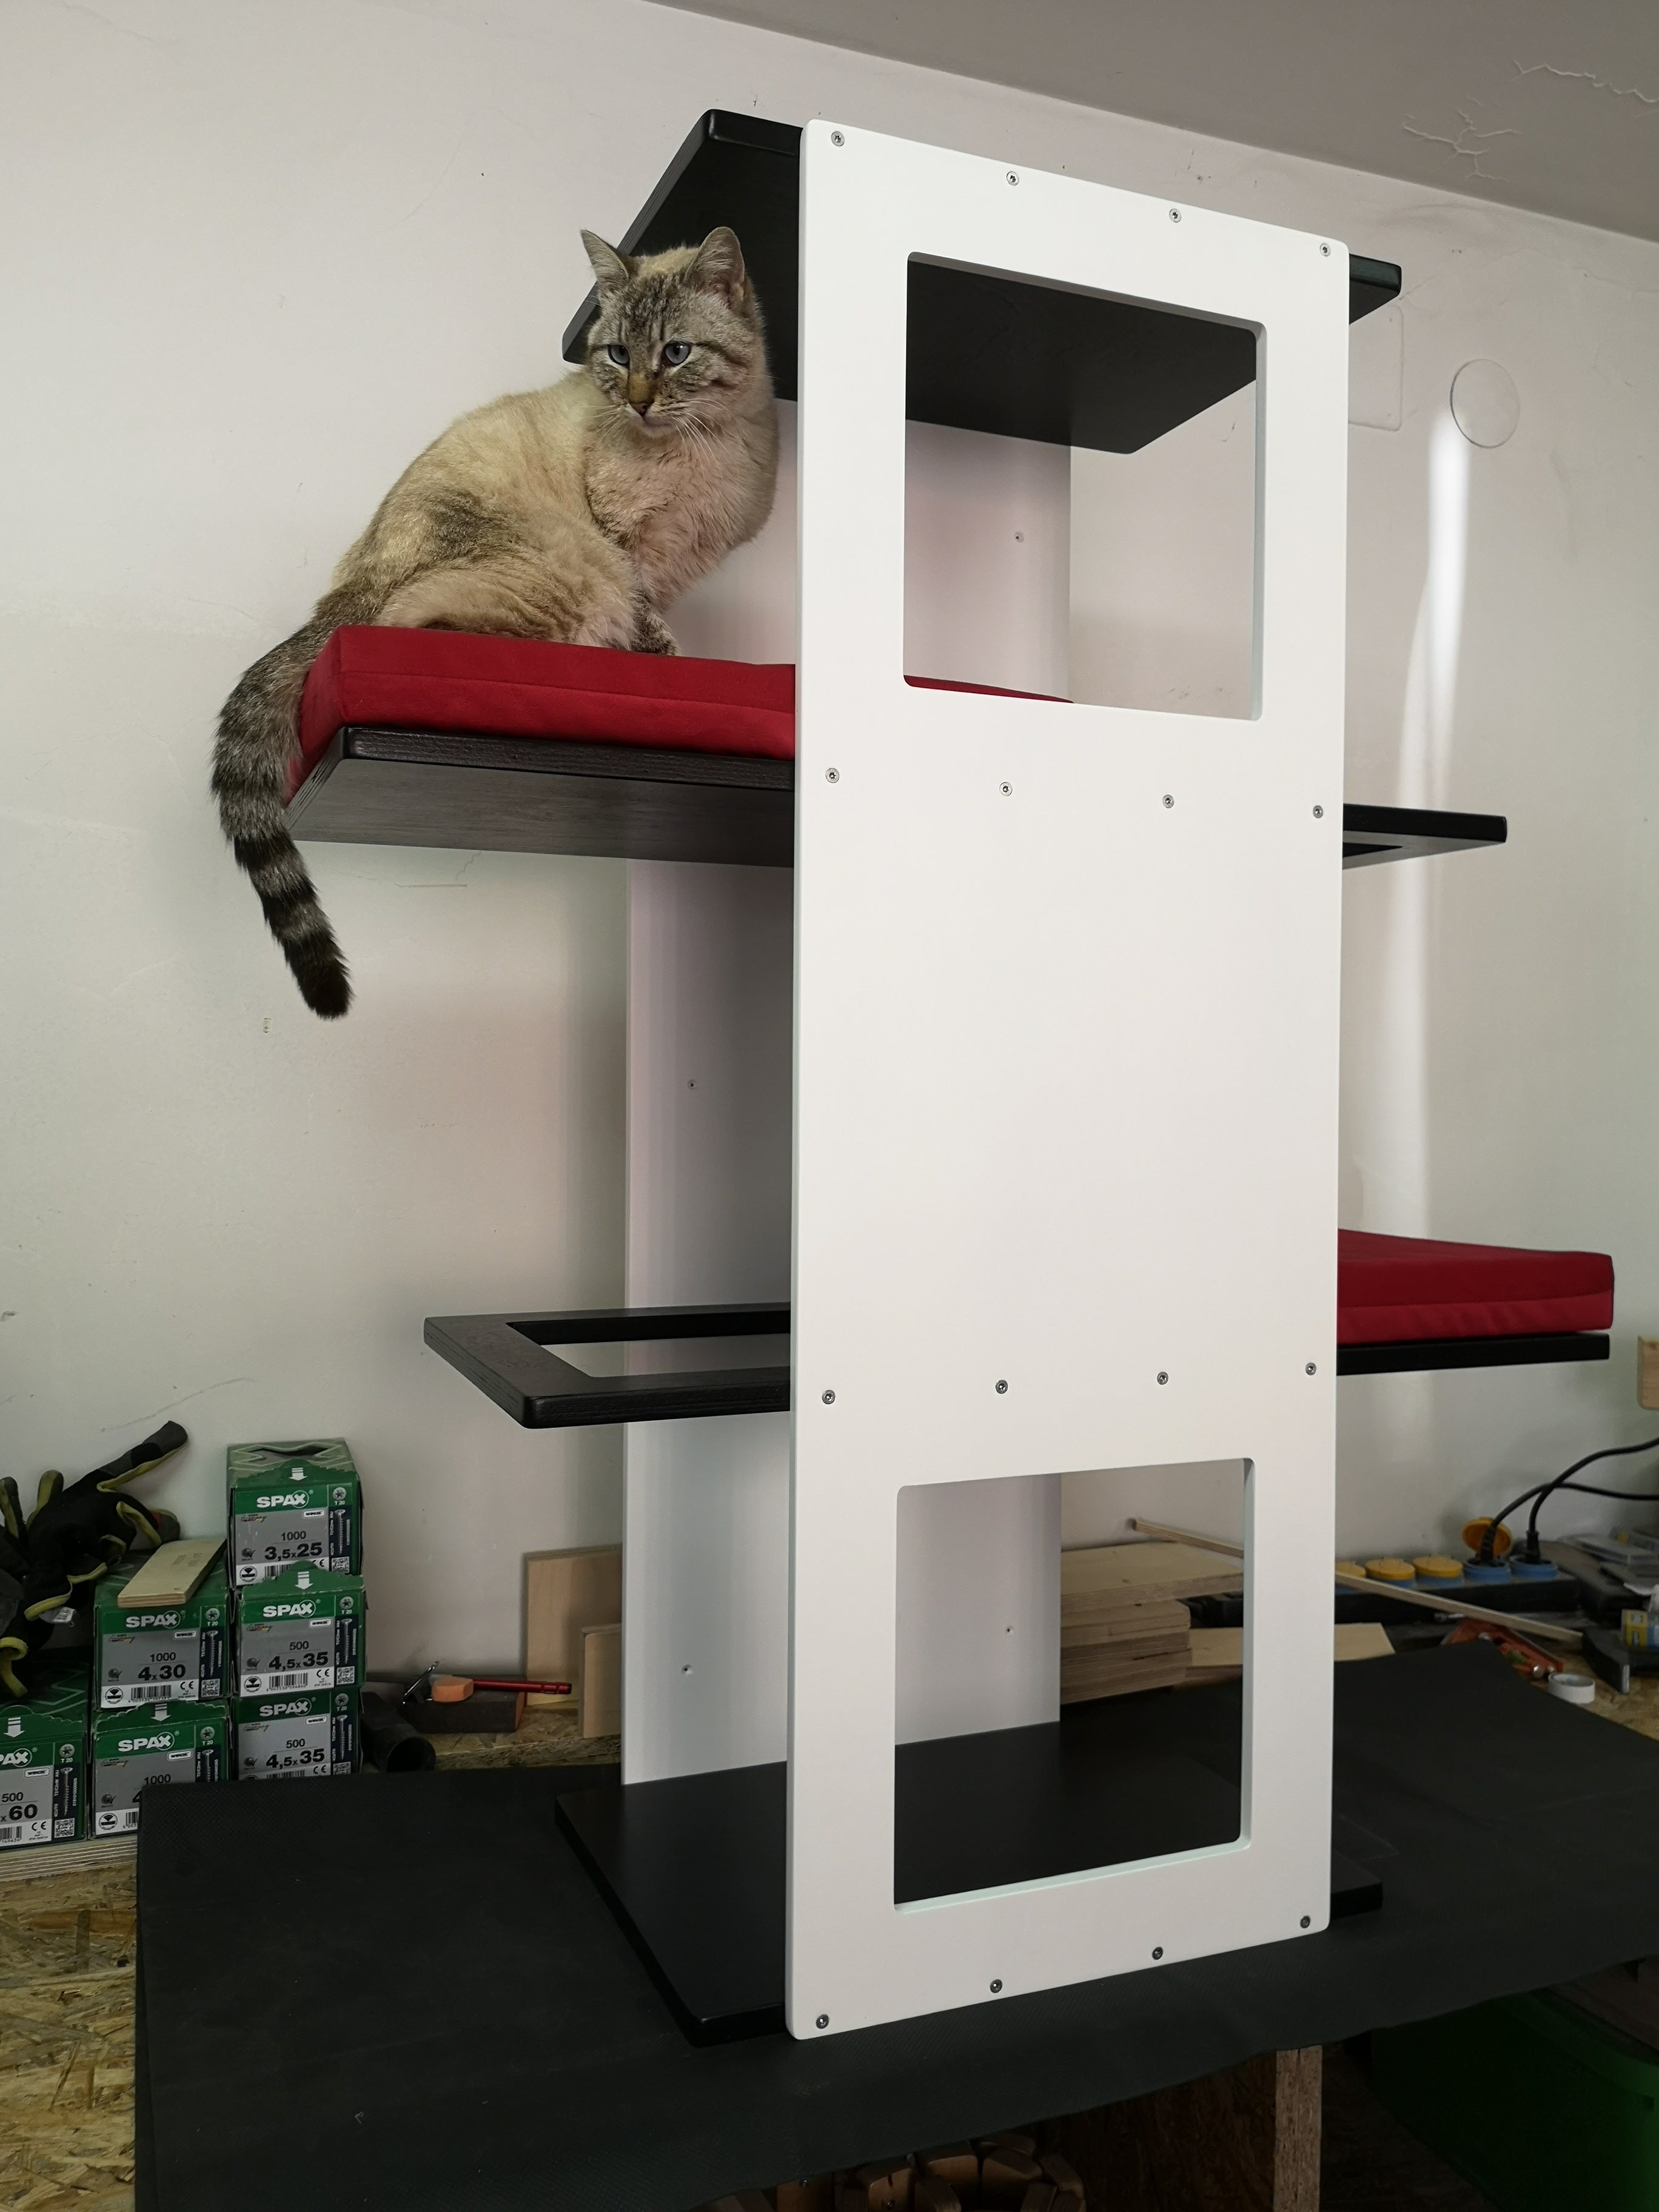 Big Cat Wall Shelf Bed Giant - Wally Giant Stacker - Scratchy Things Premium Pet Furniture